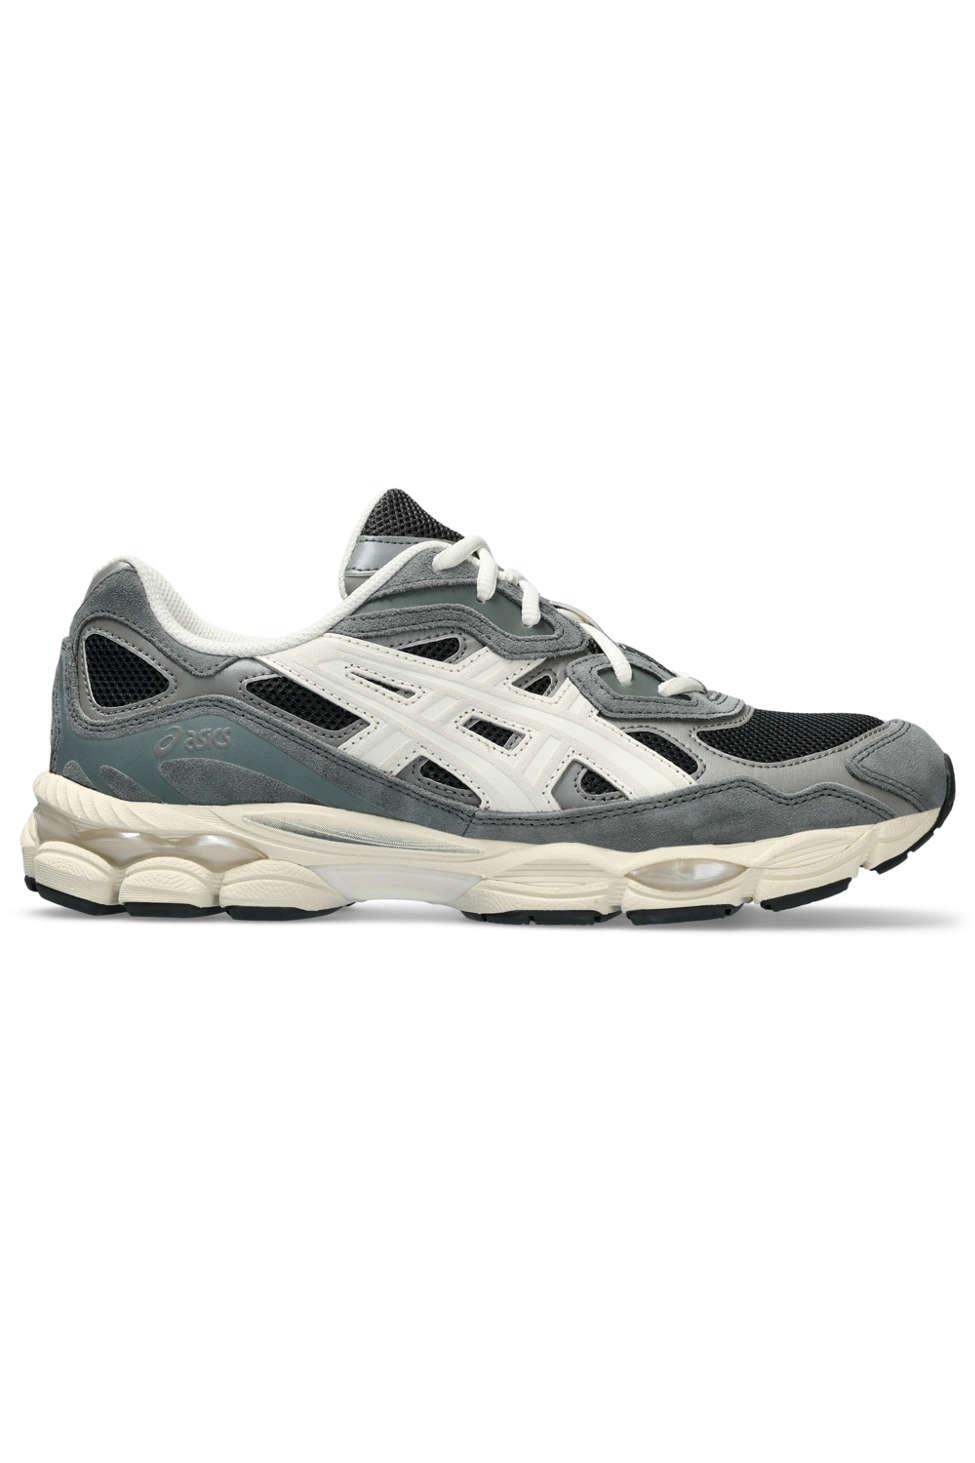 Asics Gel-nyc Sportstyle Sneakers In Graphite Grey/smoke Grey At Urban  Outfitters | Lyst